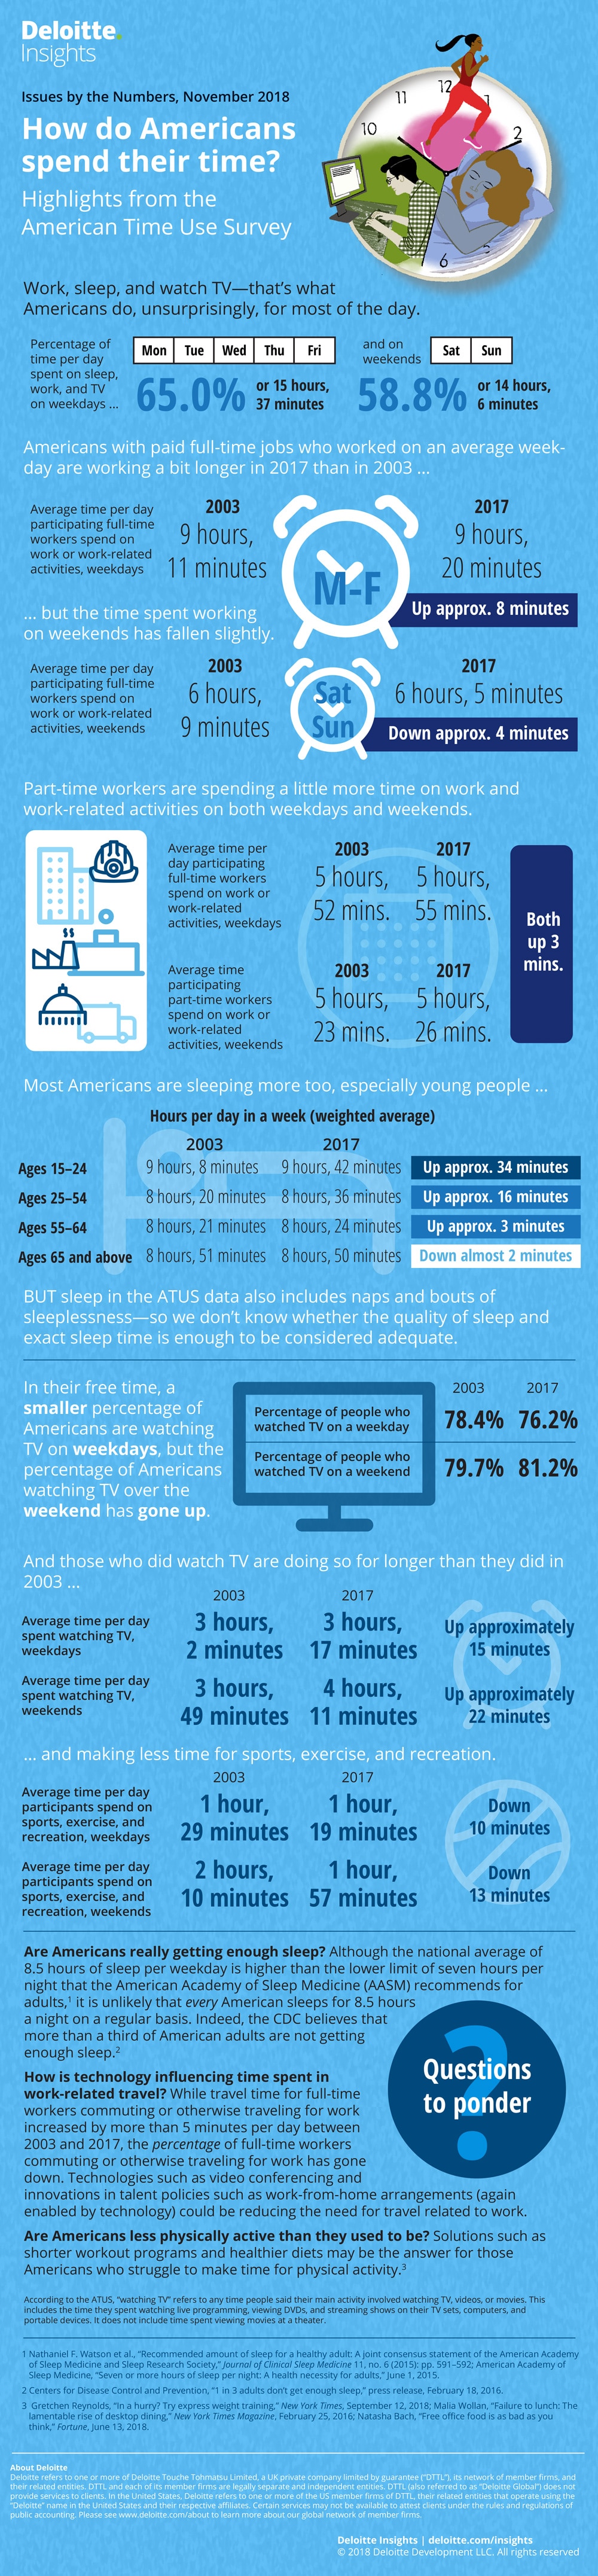 How do Americans spend their time? Highlights from the American Time Use Survey